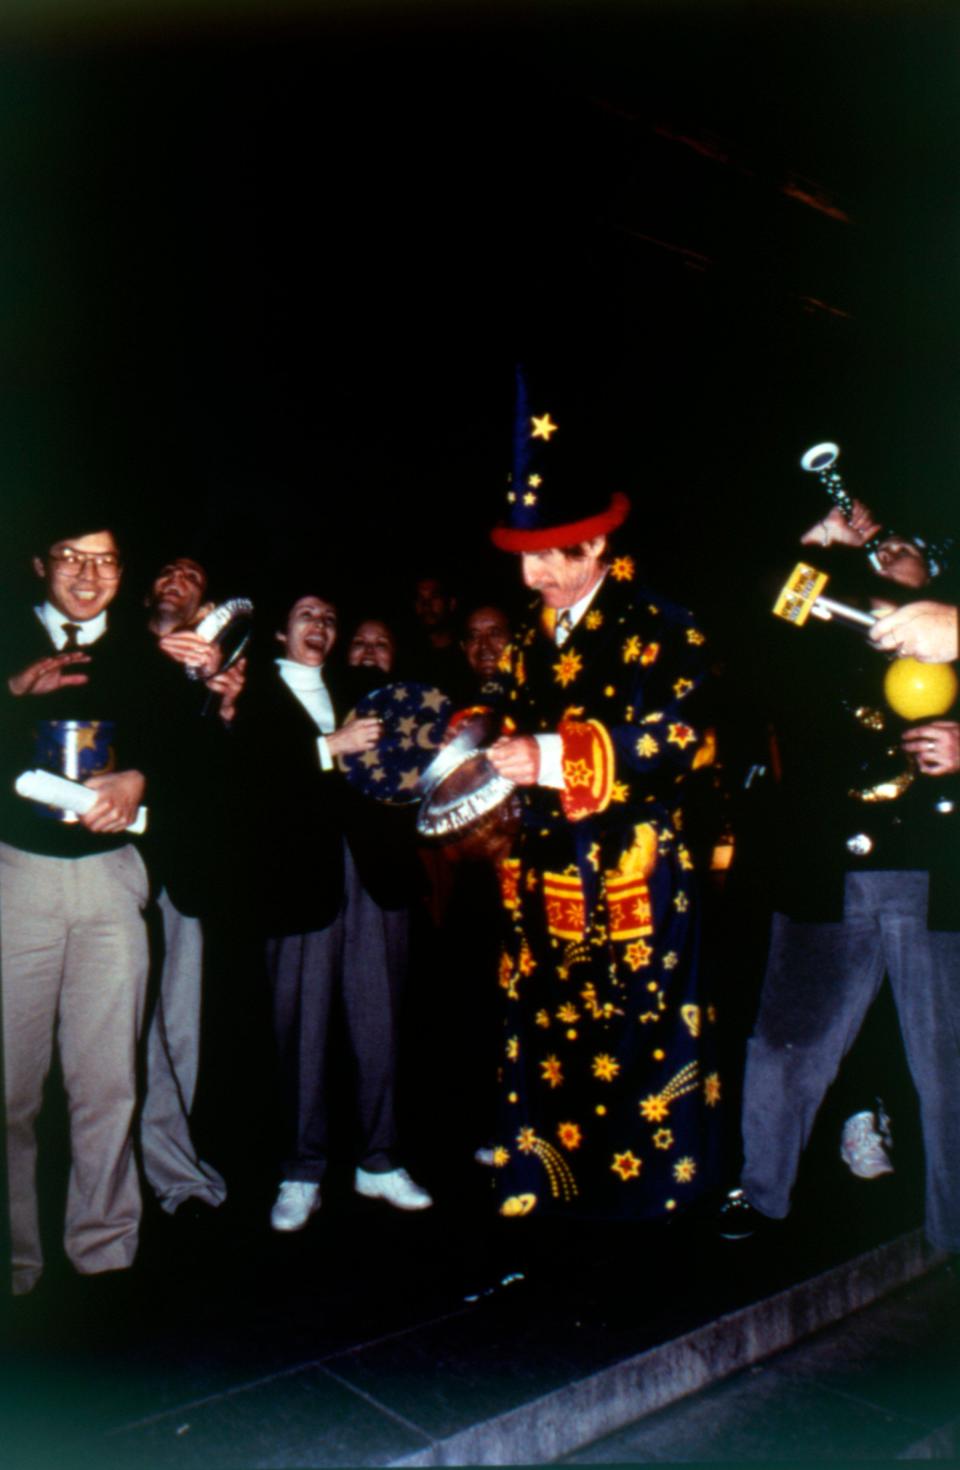 Dr. E.C. Krupp celebrates the total lunar eclipse of January 2000 in full wizard regalia, along with Patrick So, Nancy Mazzie, and others.